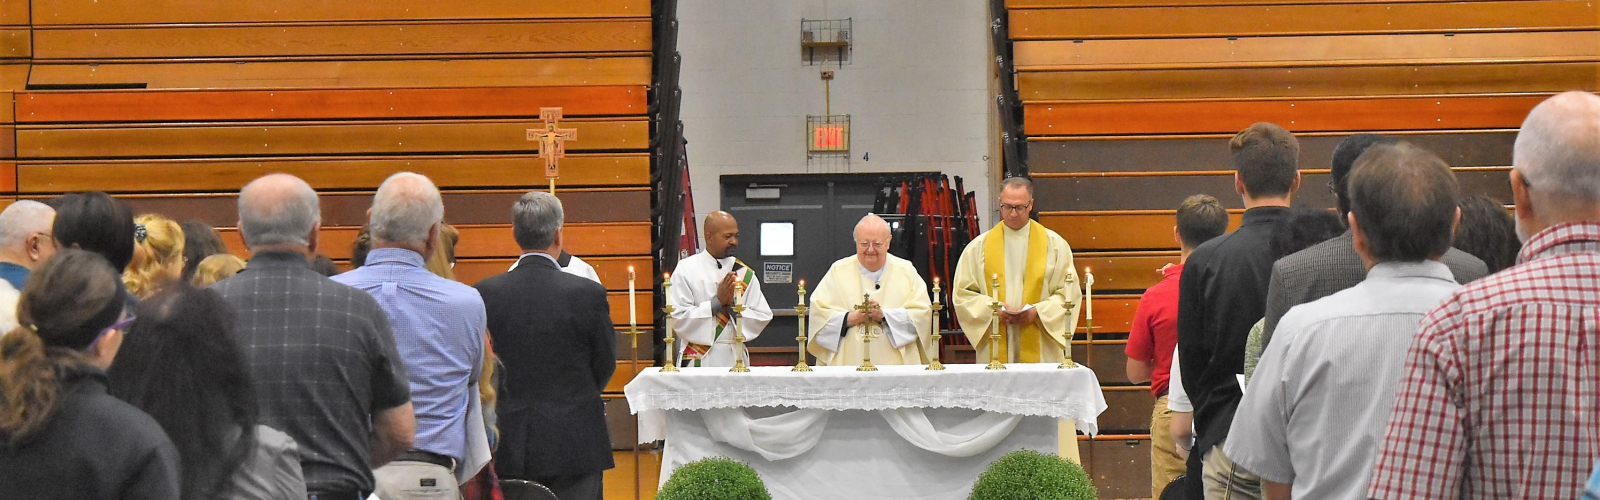 Mass being held in the Luers gym